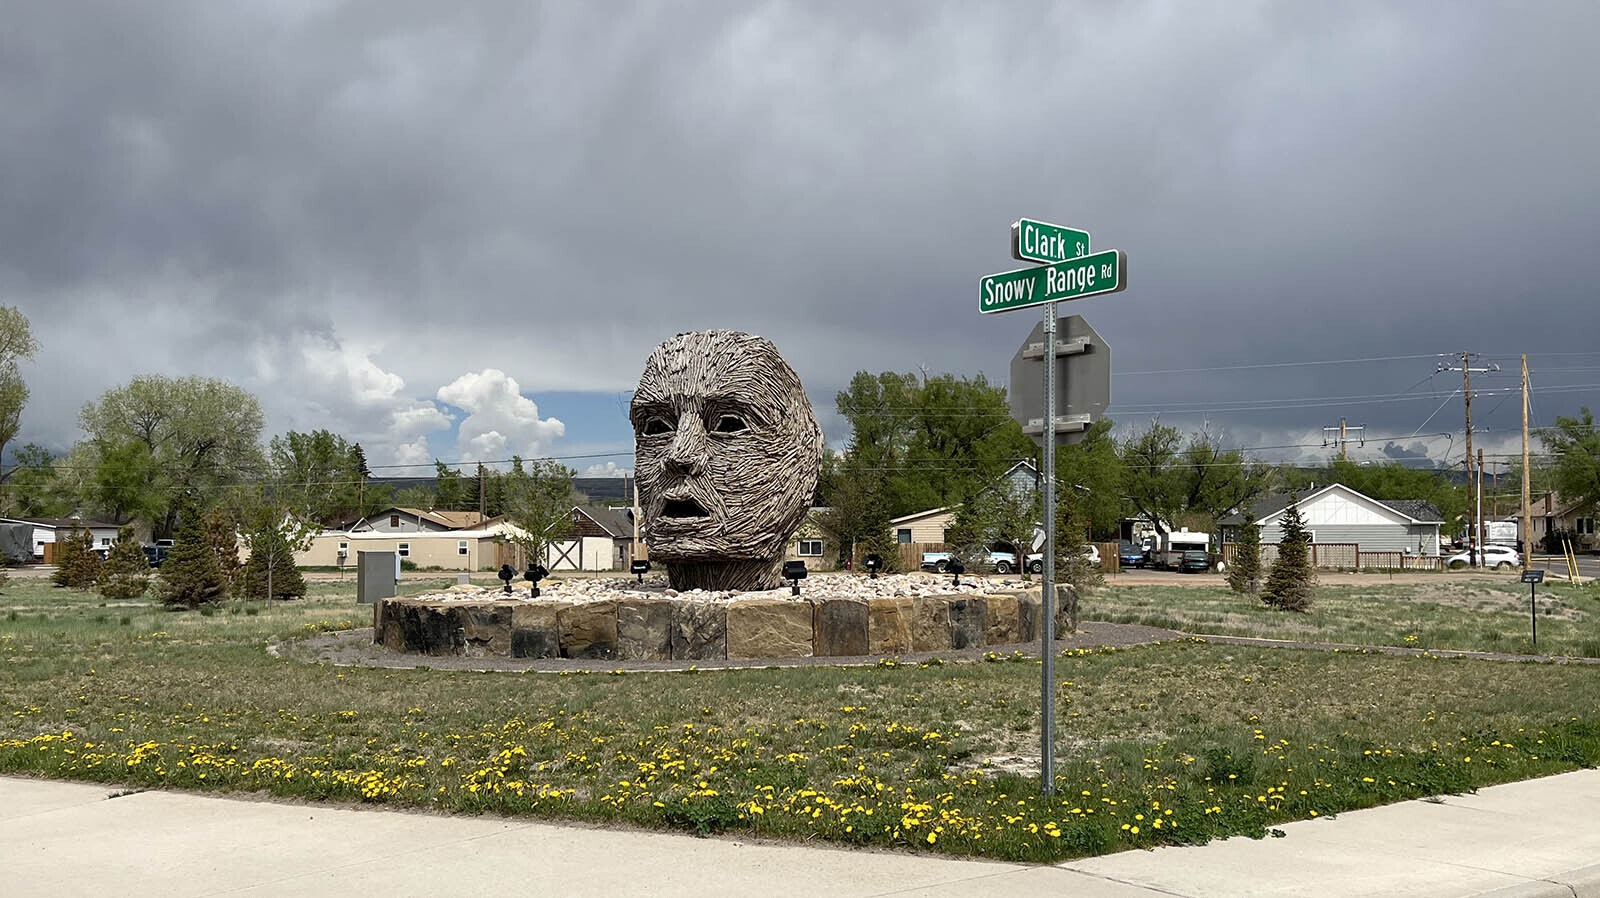 "Exhaling Dissolution" is a 13.5-foot-tall head made of cottonwood bark over steak rods and wire mesh. It looks west from the northeast corner of Clark Street and Snowy Range Road in Laramie.